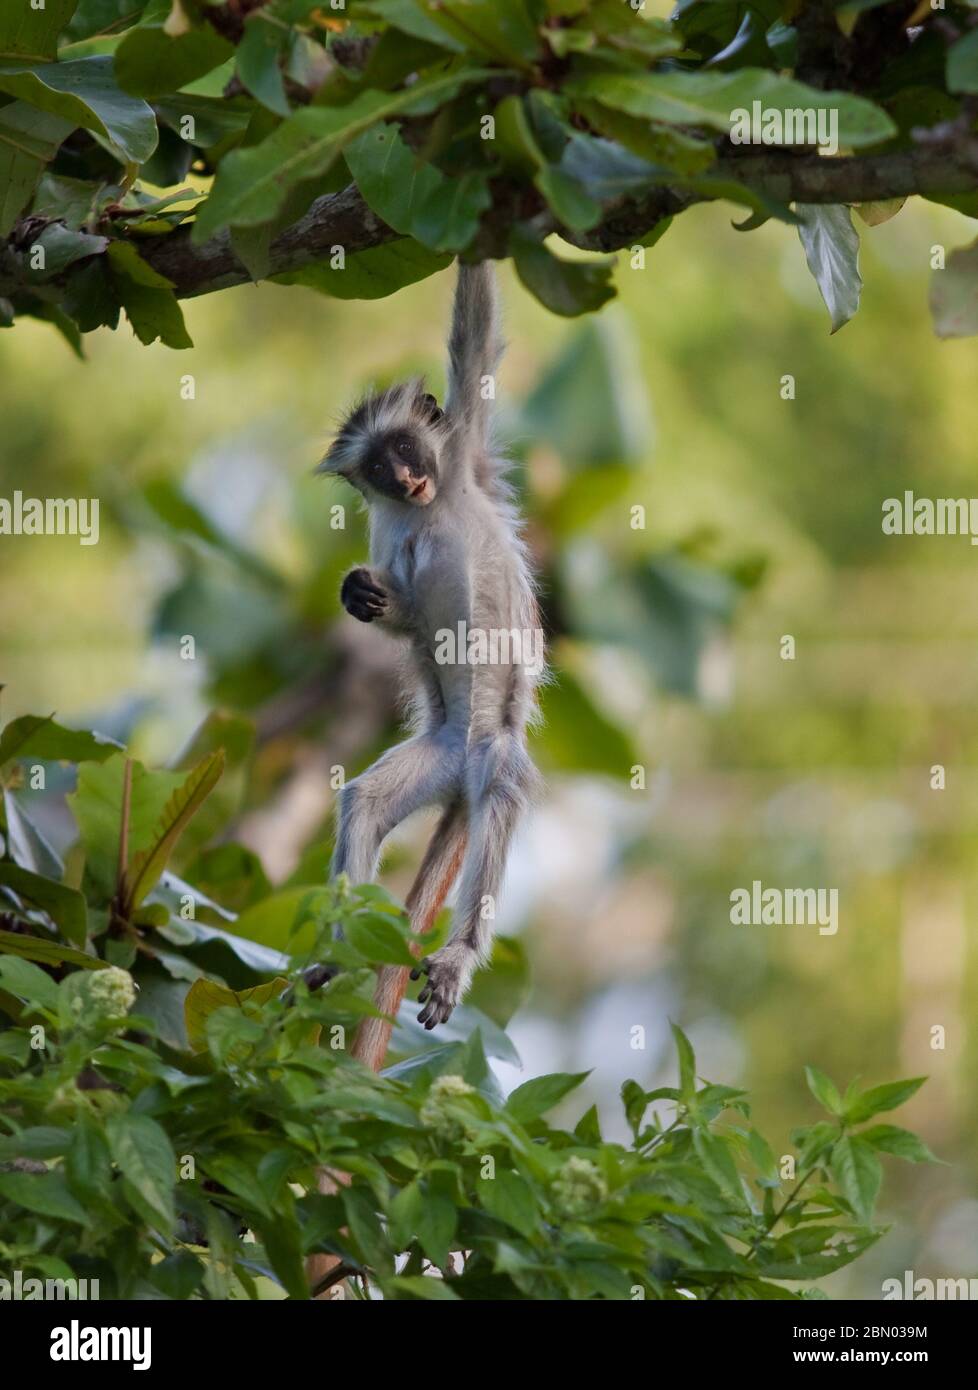 Baby red colobus monkey in green forest natural habitat Stock Photo